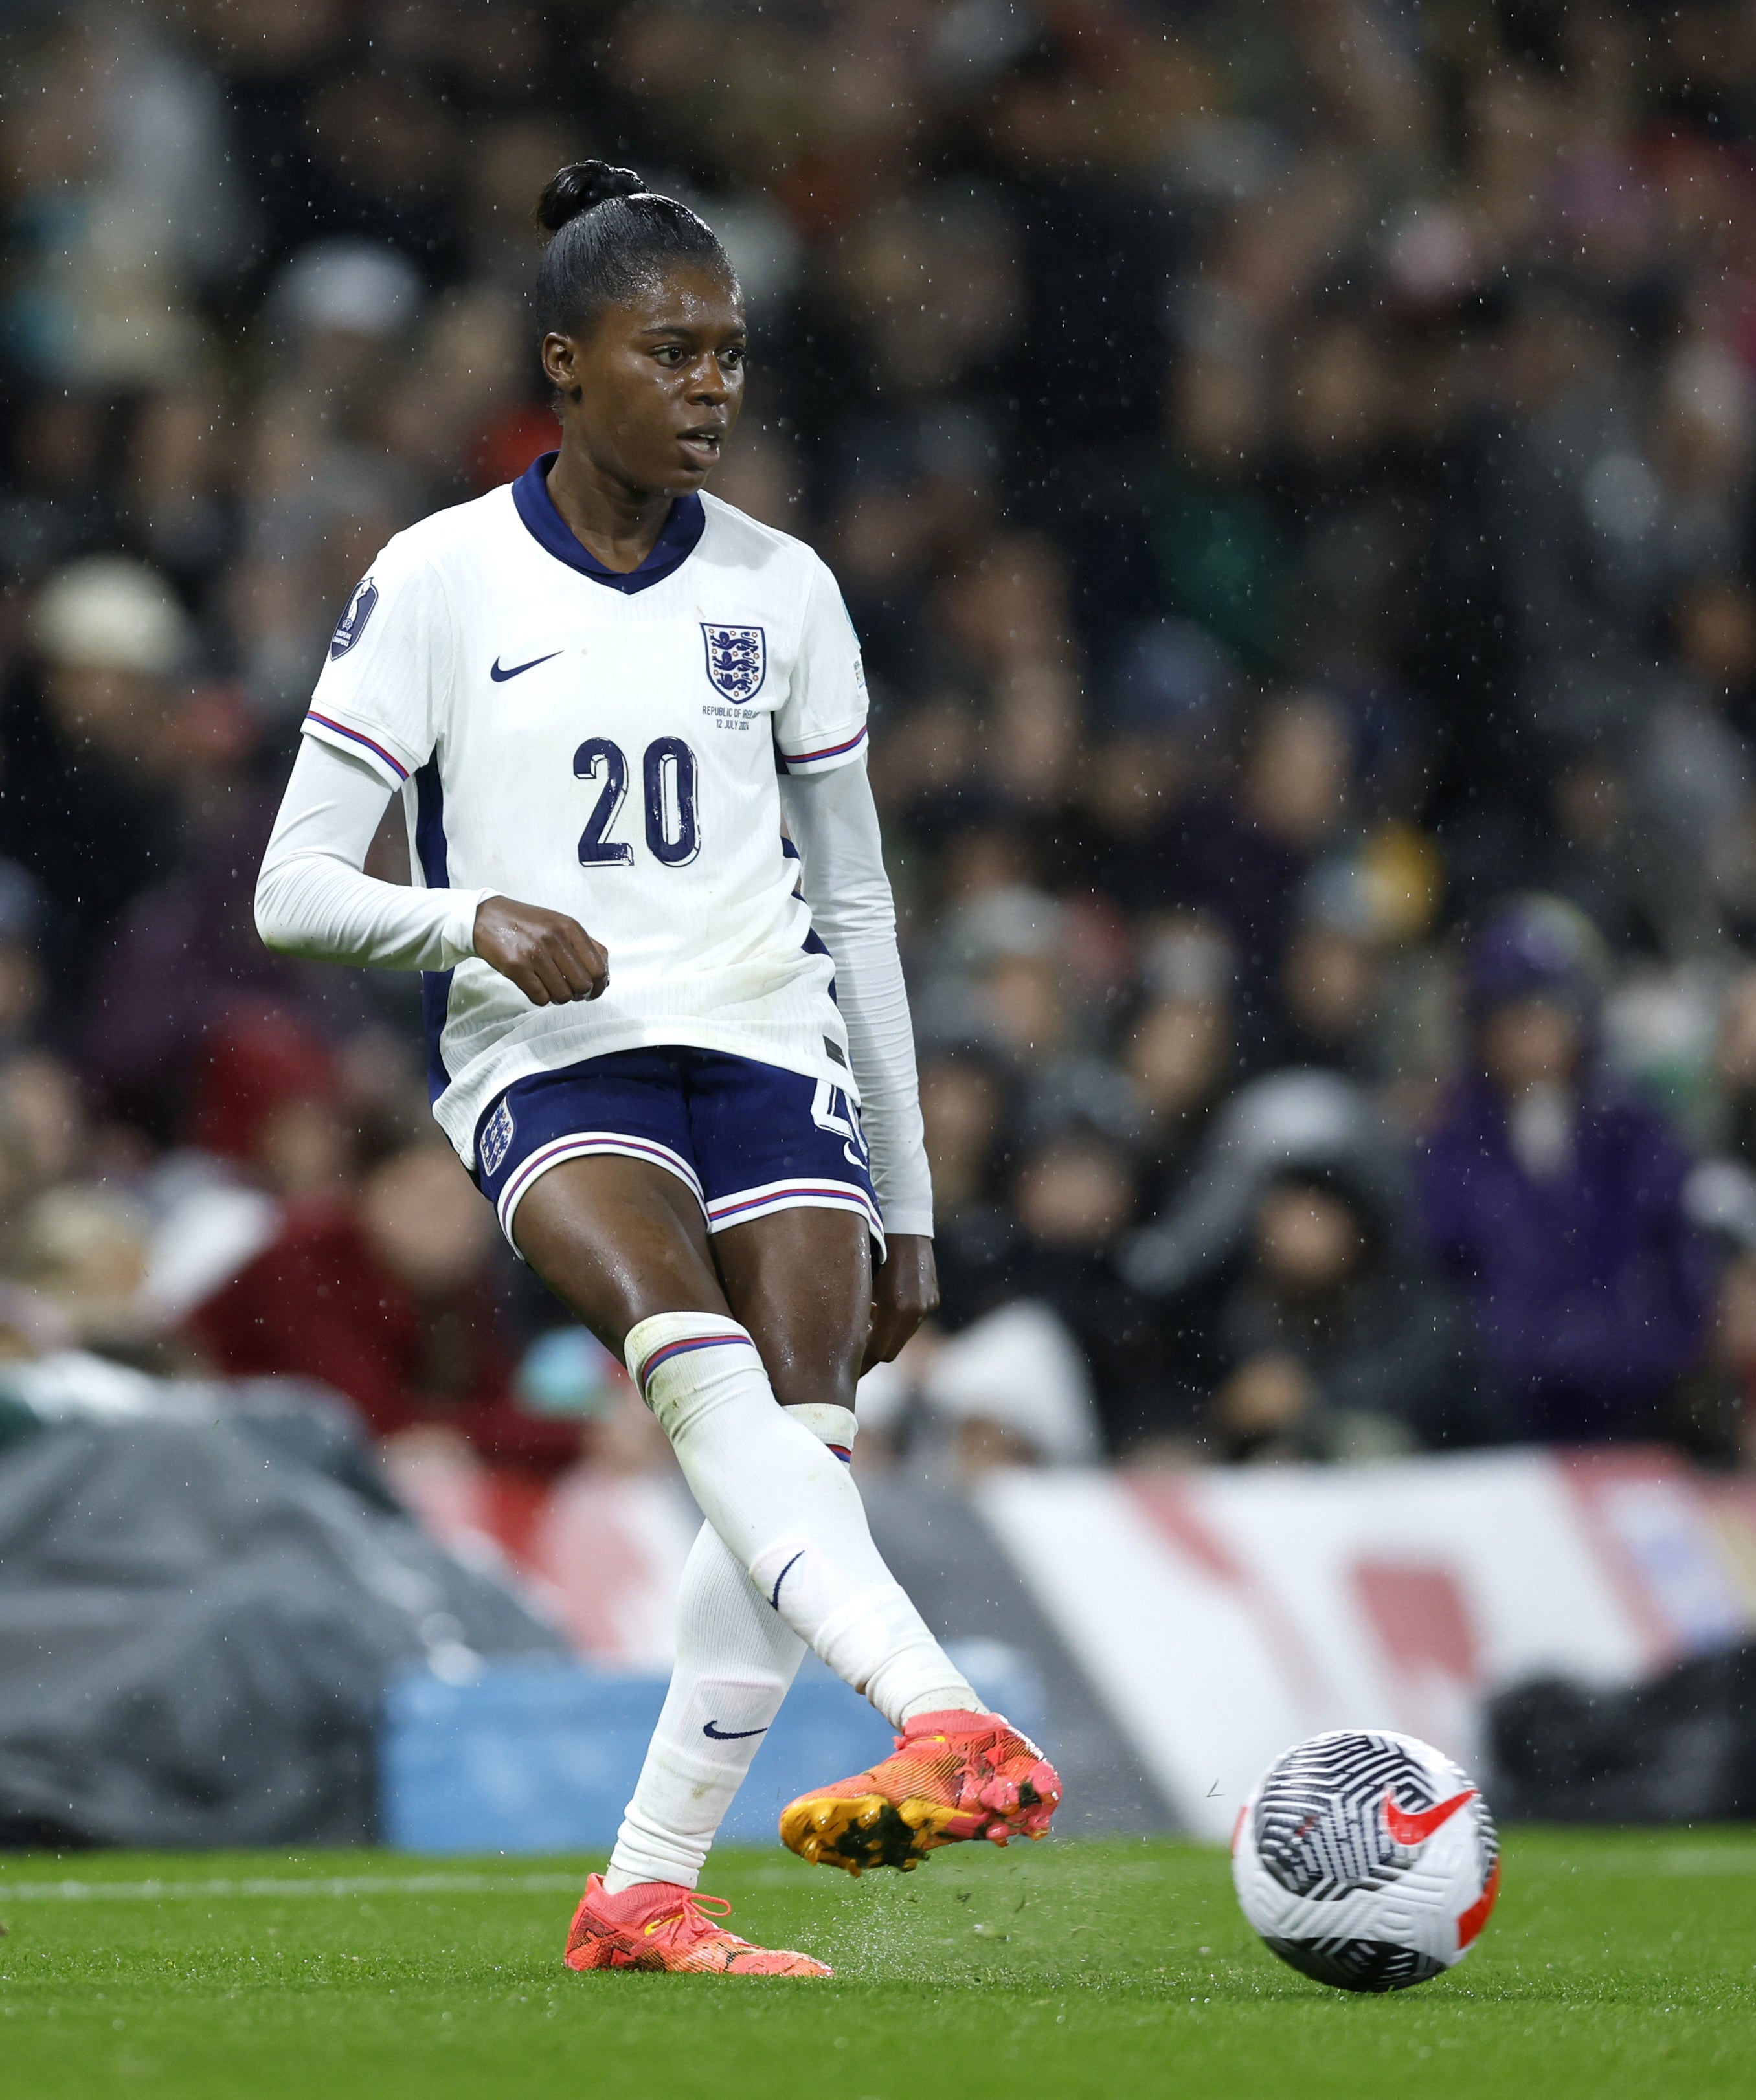 Tottenham’s Jessica Naz made her England debut on Friday night (Nigel French/PA)